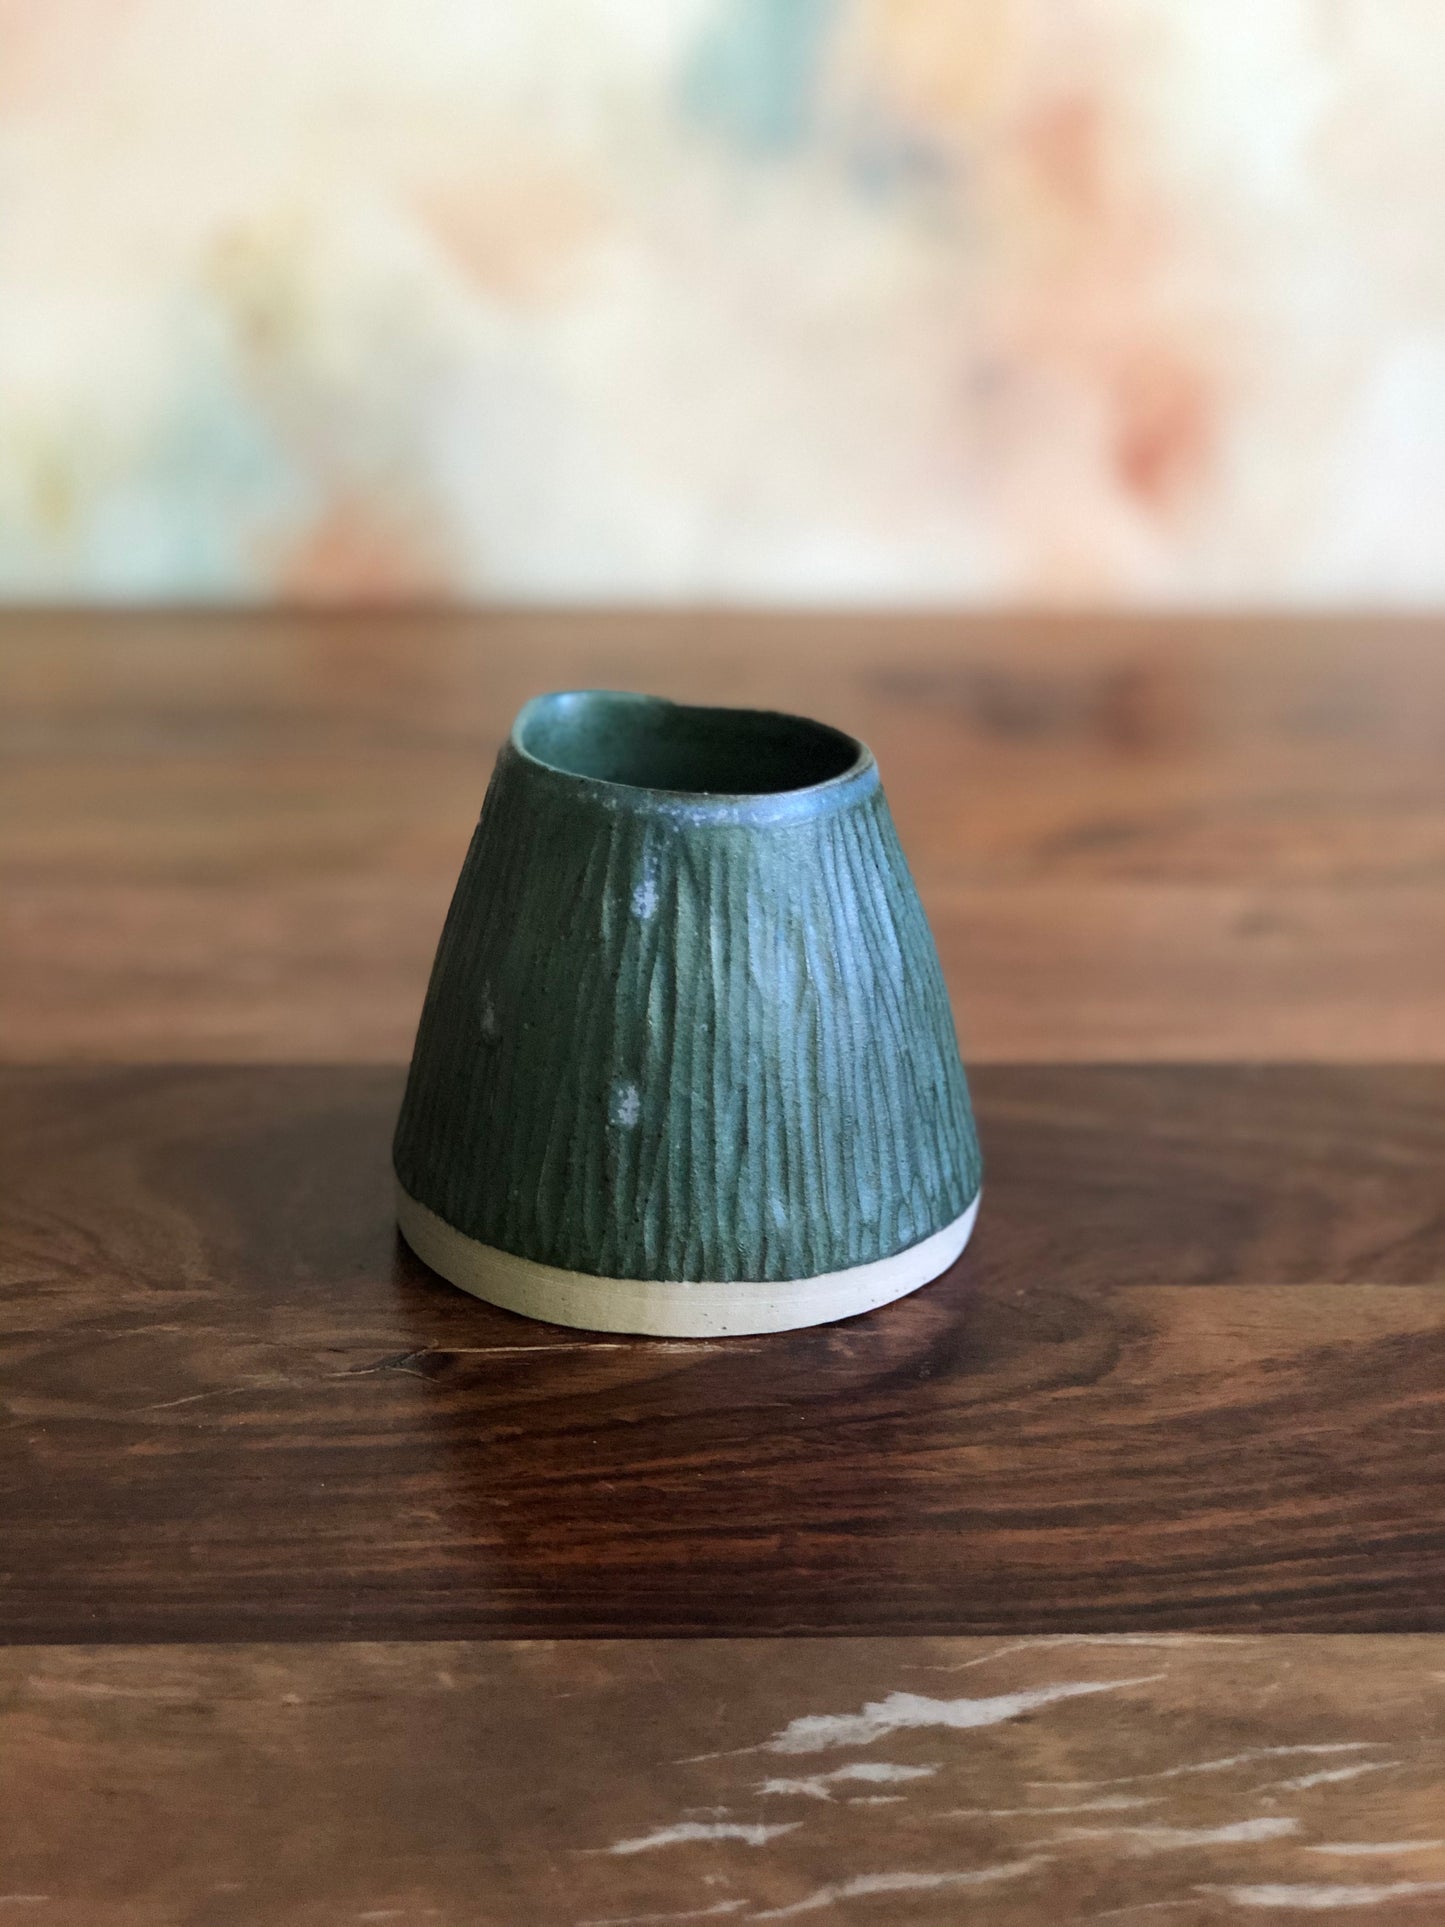 Carved green conical pourer